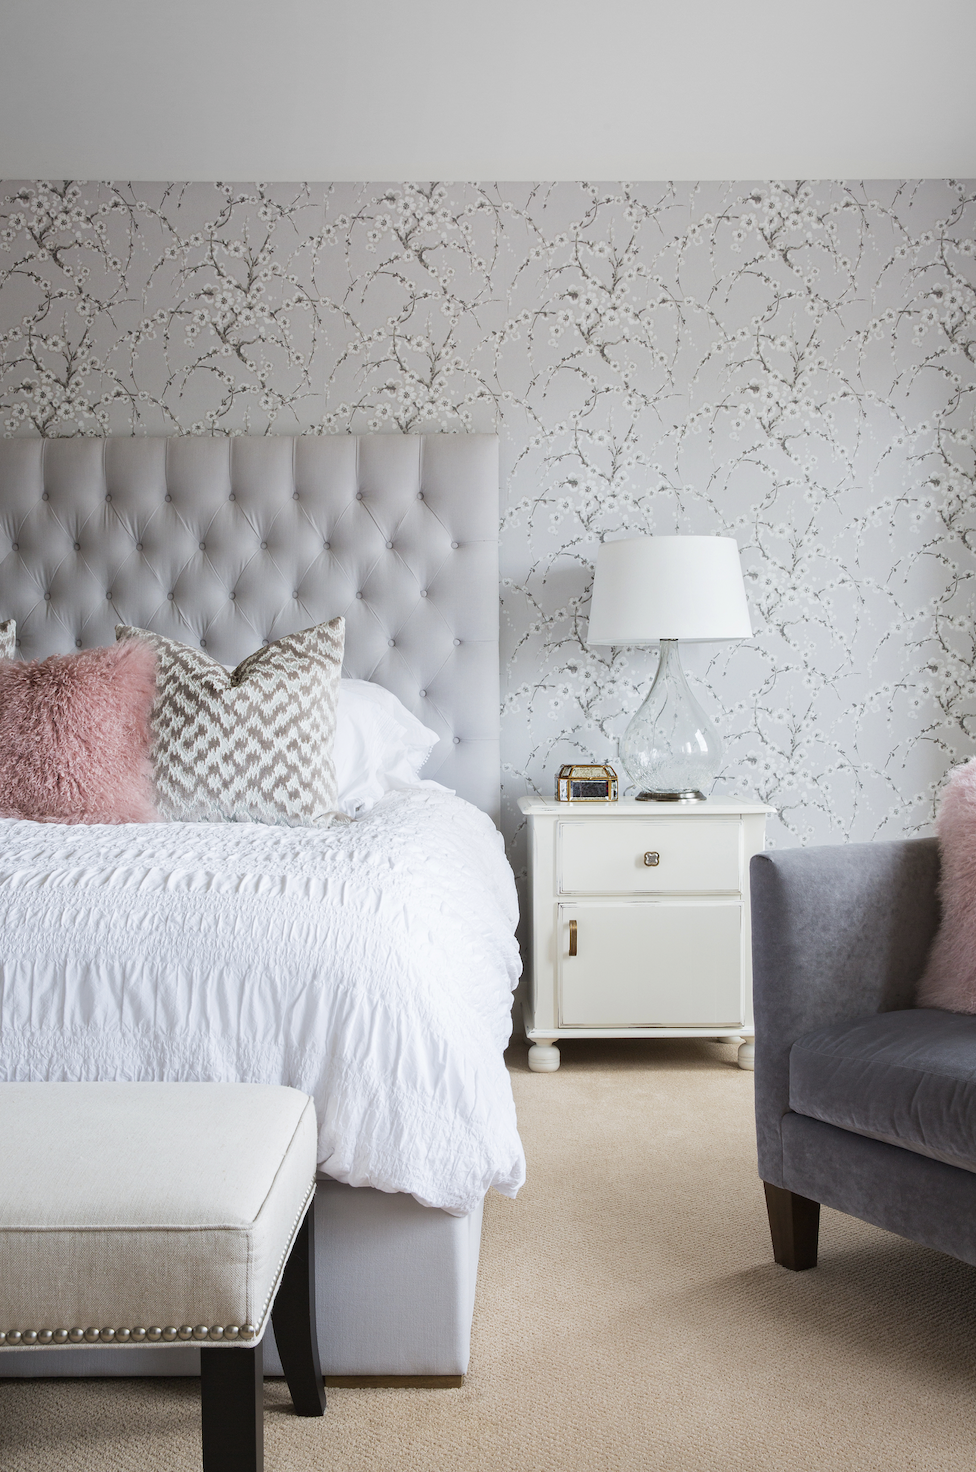 41 Bedroom Wallpaper Ideas We're Currently Coveting